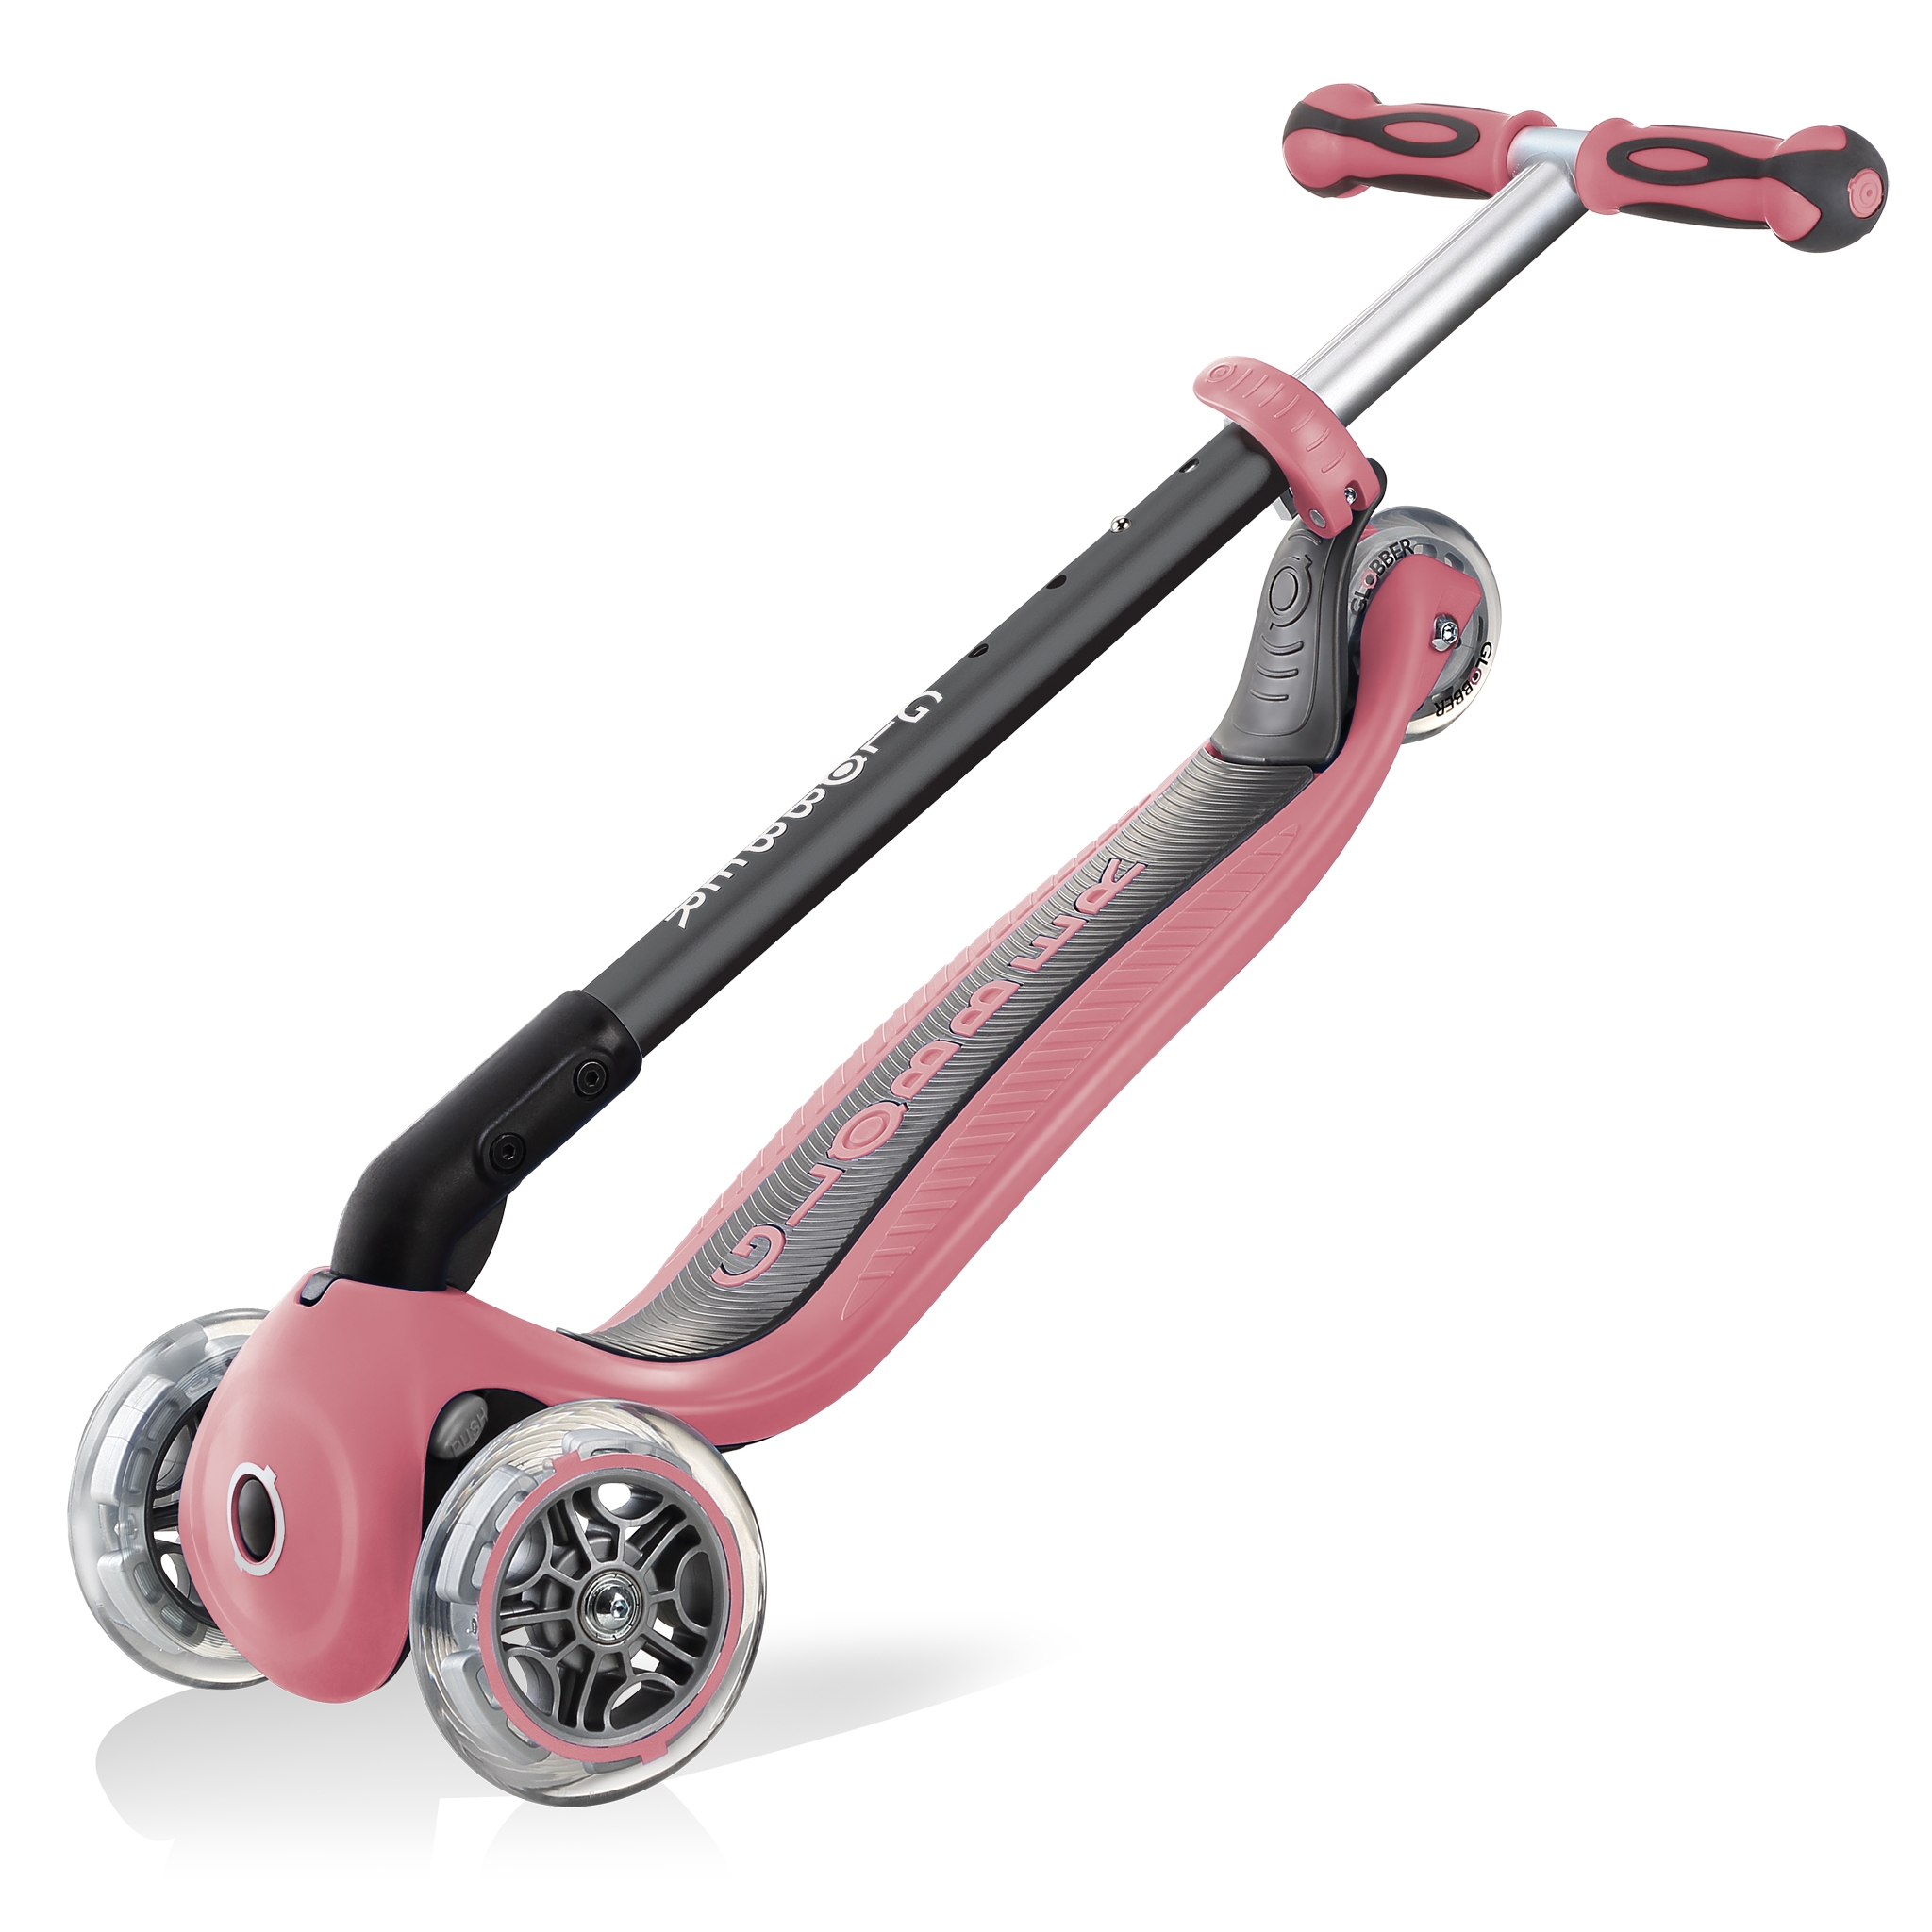 GO-UP-DELUXE-PLAY-ride-on-walking-bike-scooter-with-light-and-sound-module-trolley-mode-compatible-pastel-deep-pink 5